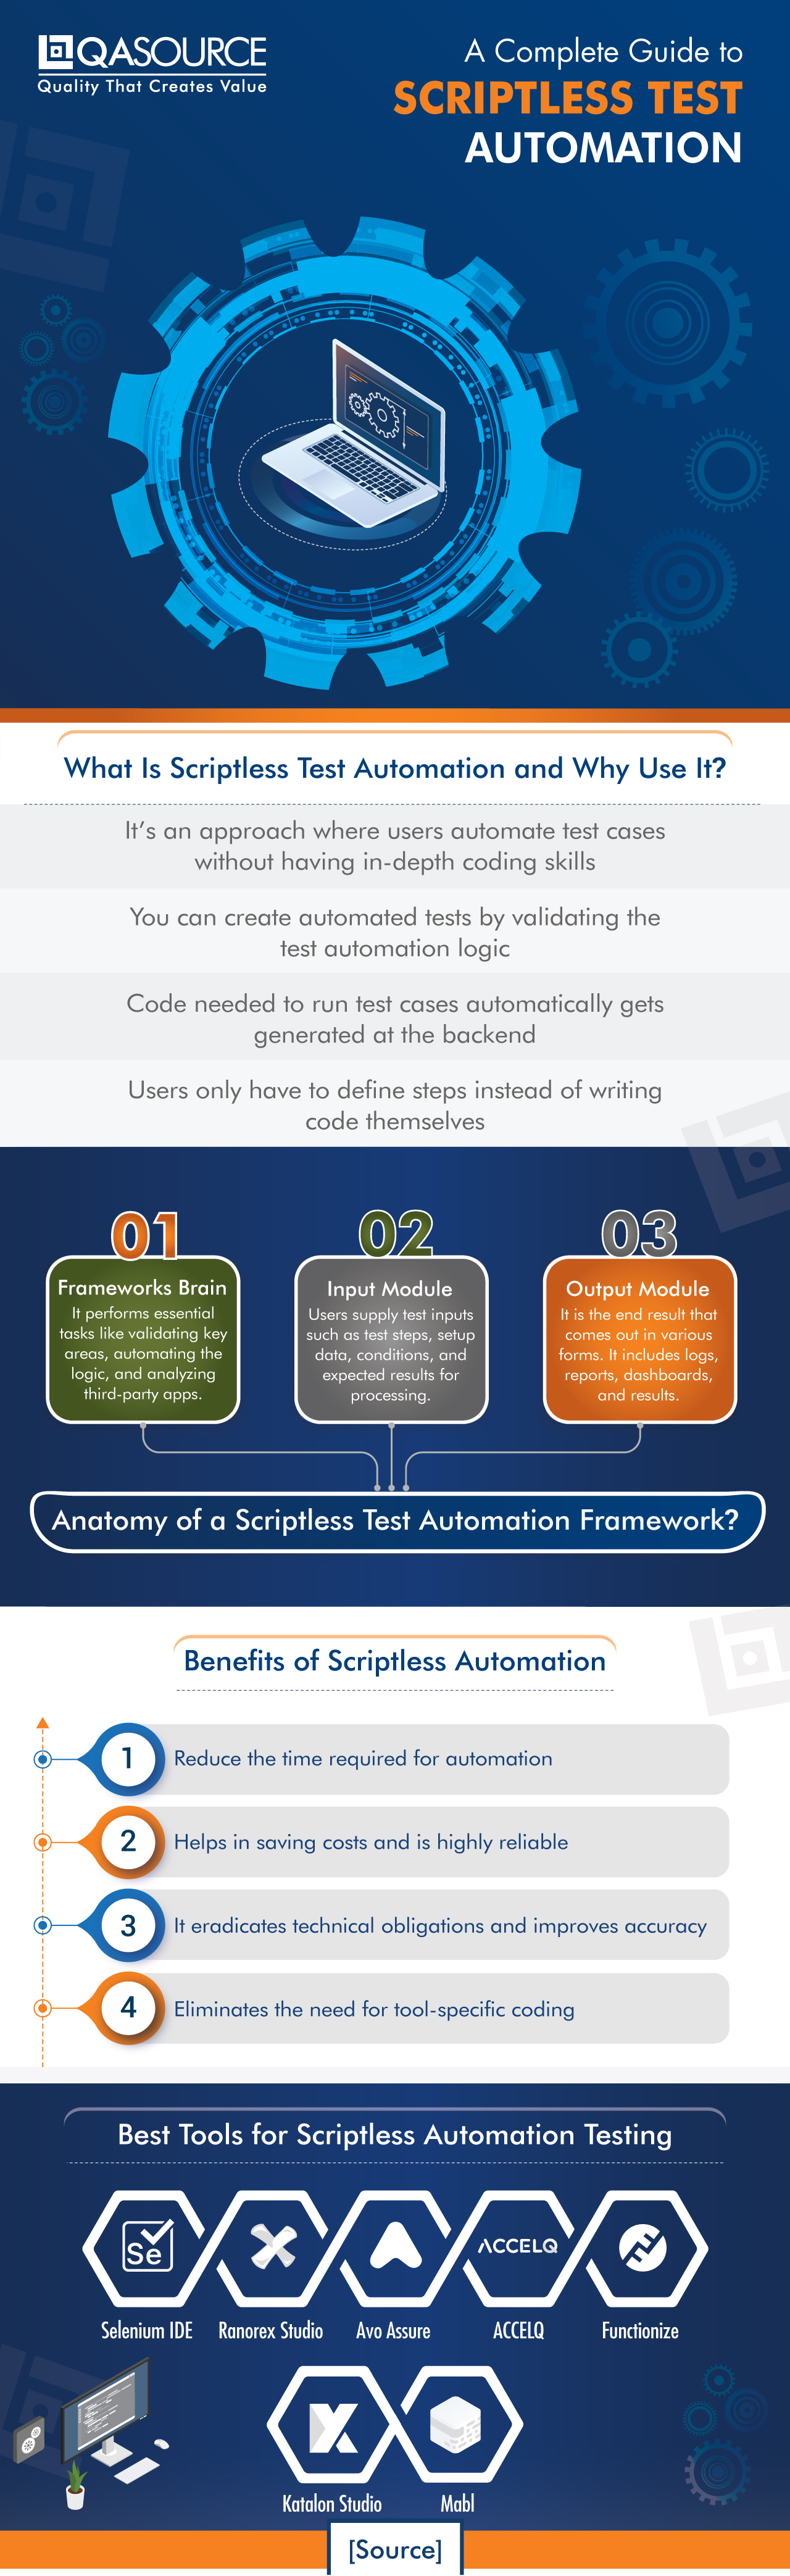 A Complete Guide to Scriptless Test Automation